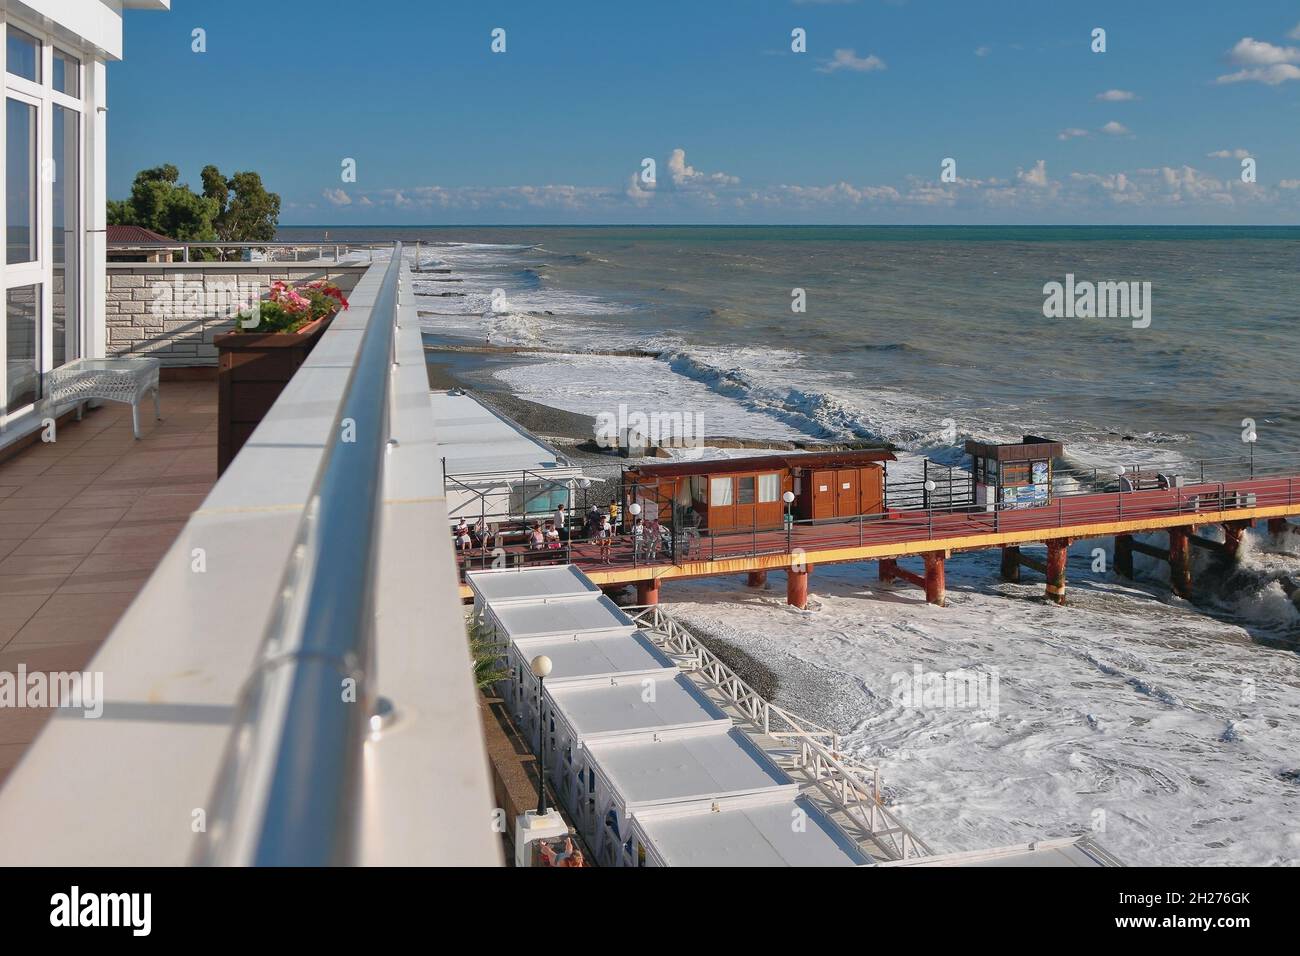 View from balcony to promenade, pier and stormy sea. Adler, Sochi, Russia Stock Photo